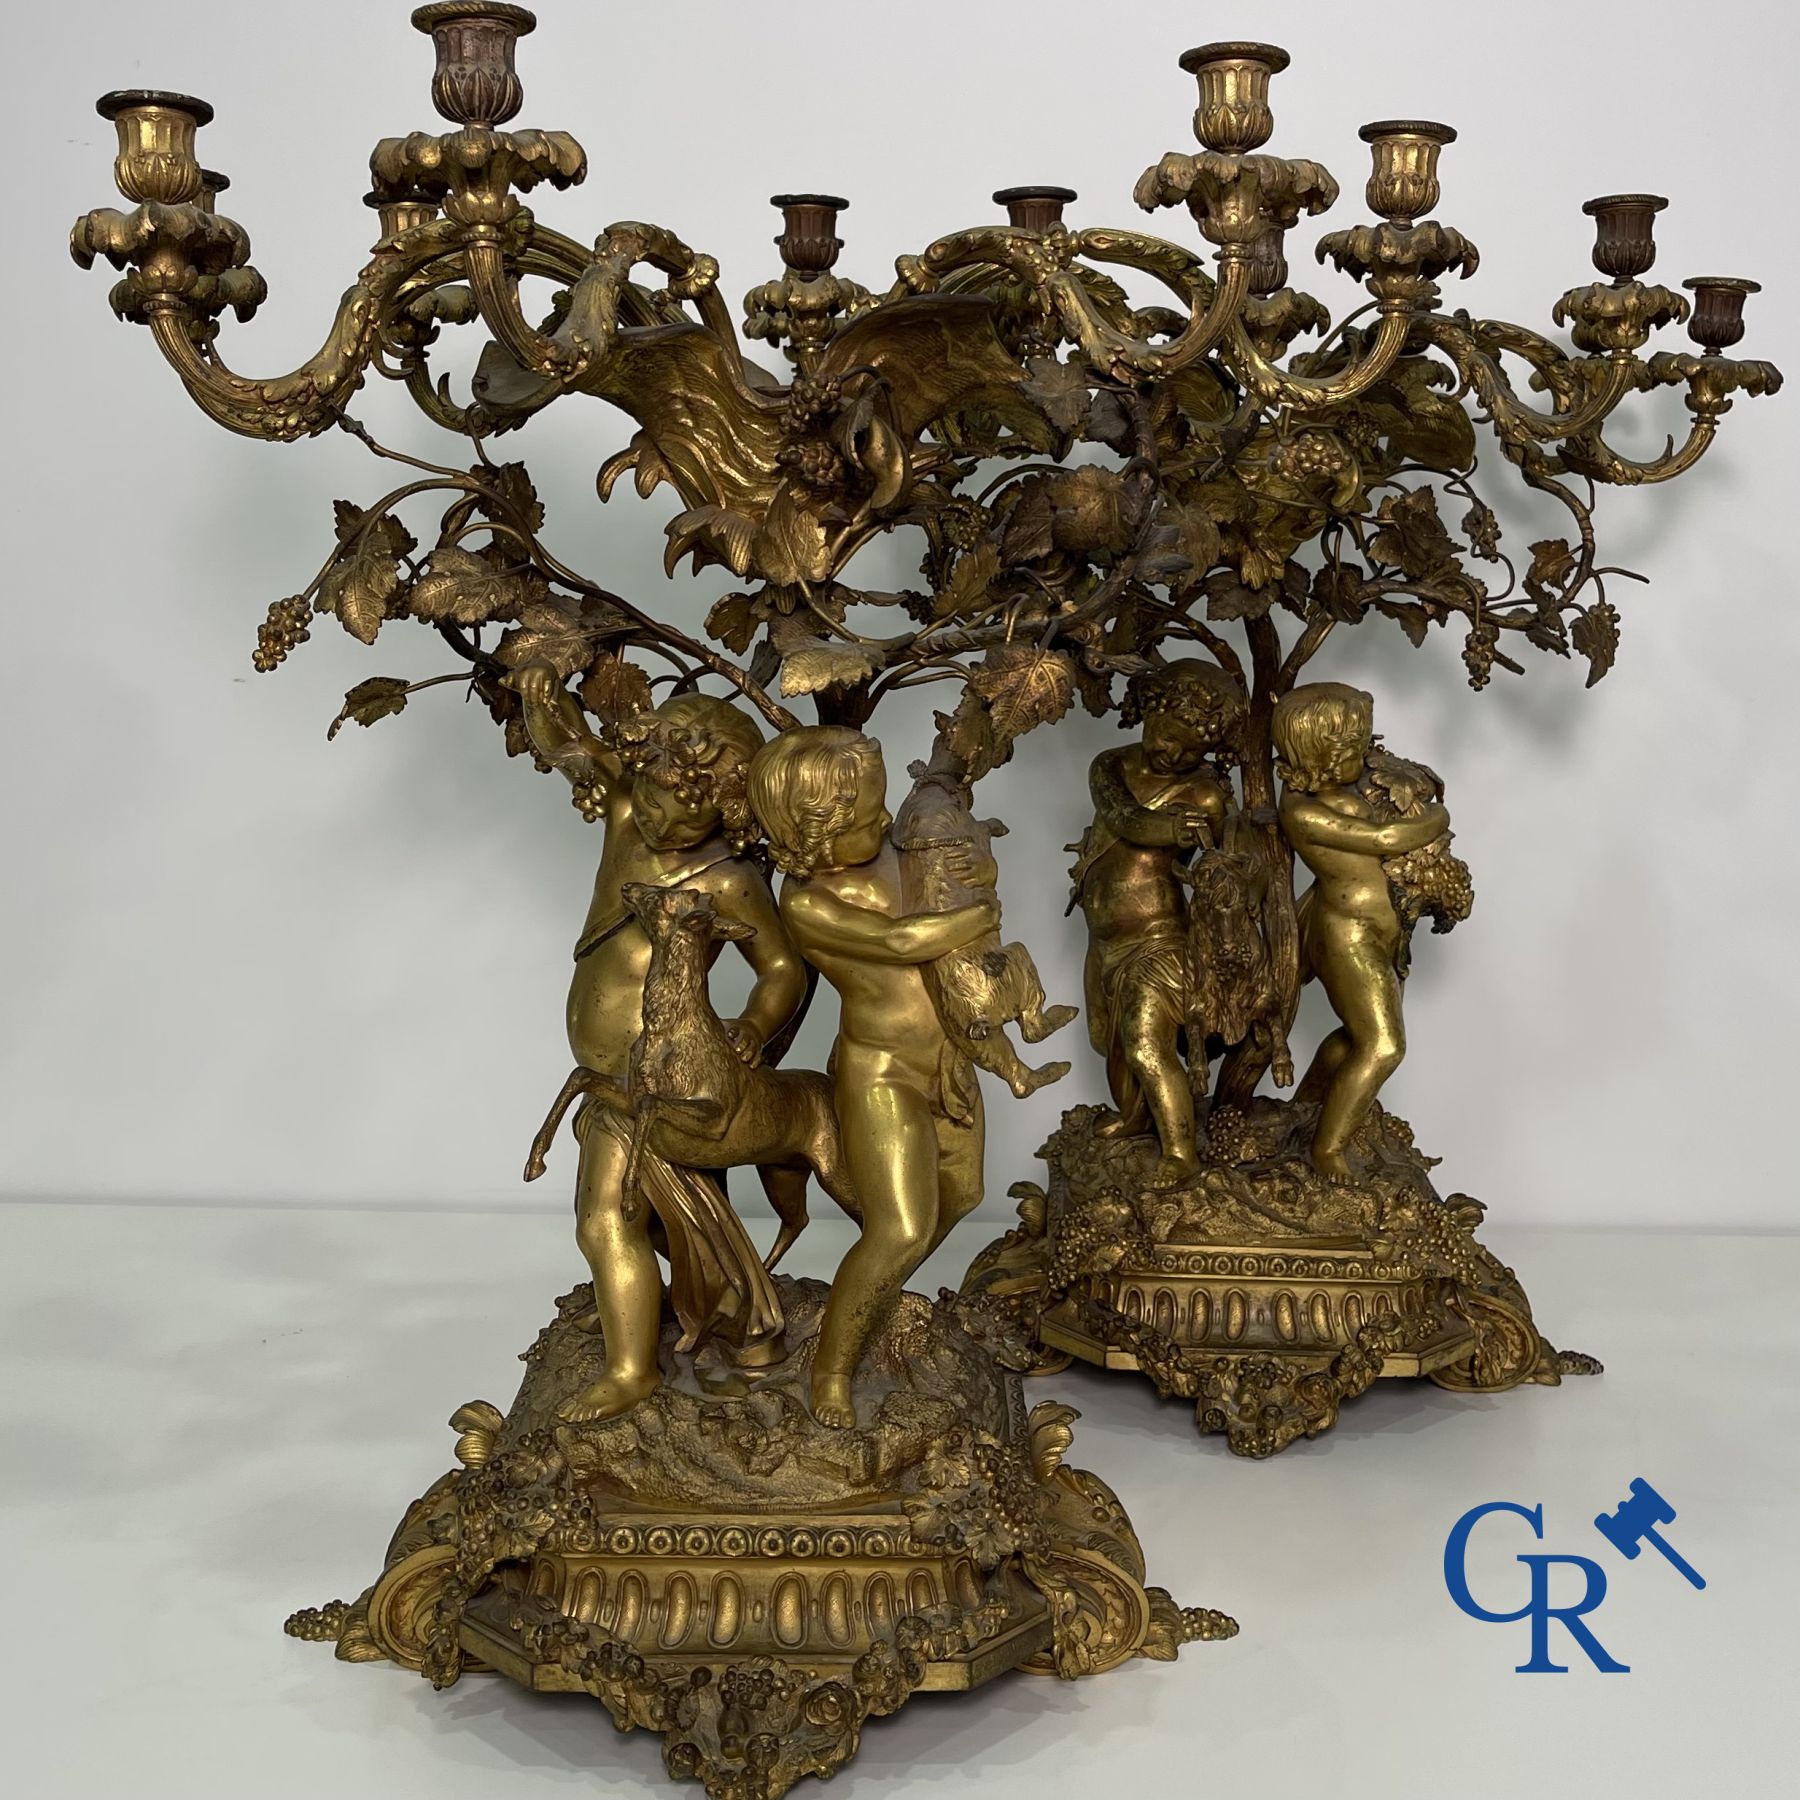 A pair of imposing bronze candlesticks with putti in LXVI style. Napoleon III period. - Image 2 of 32